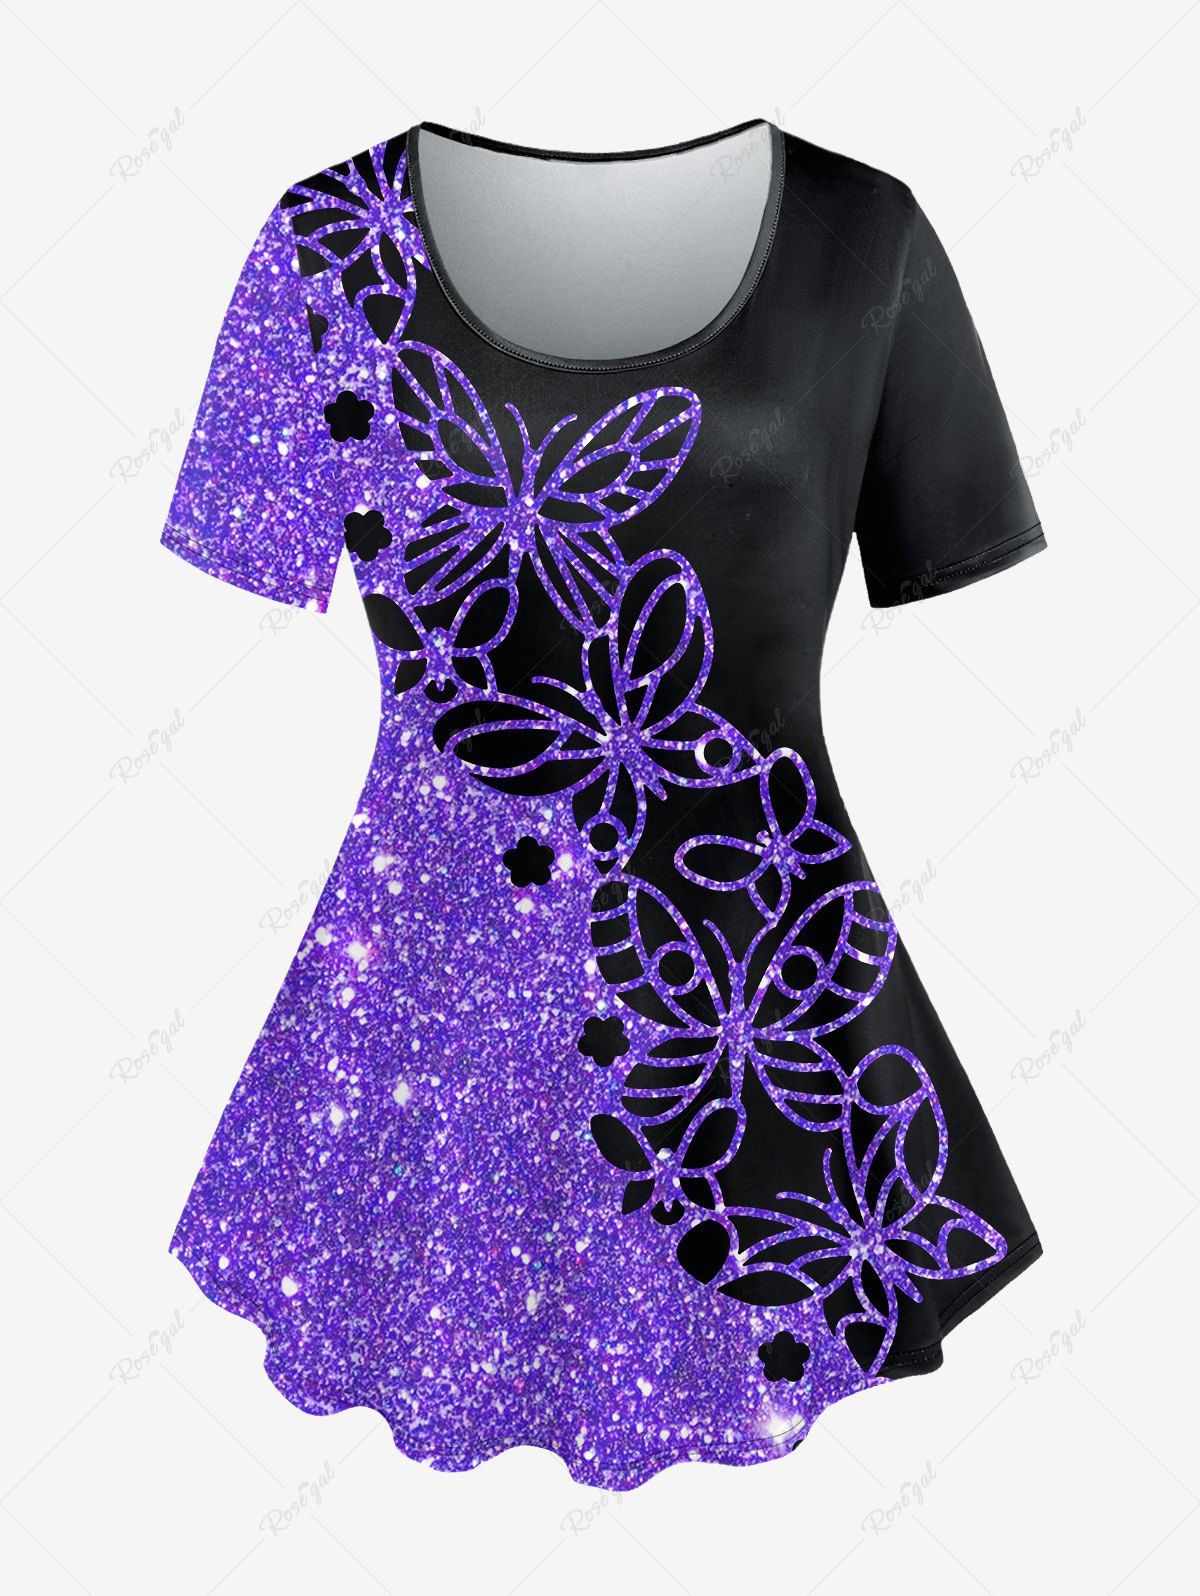 Sale Plus Size Colorblock Butterfly Sparkling Sequin Print Short Sleeves T-shirt  